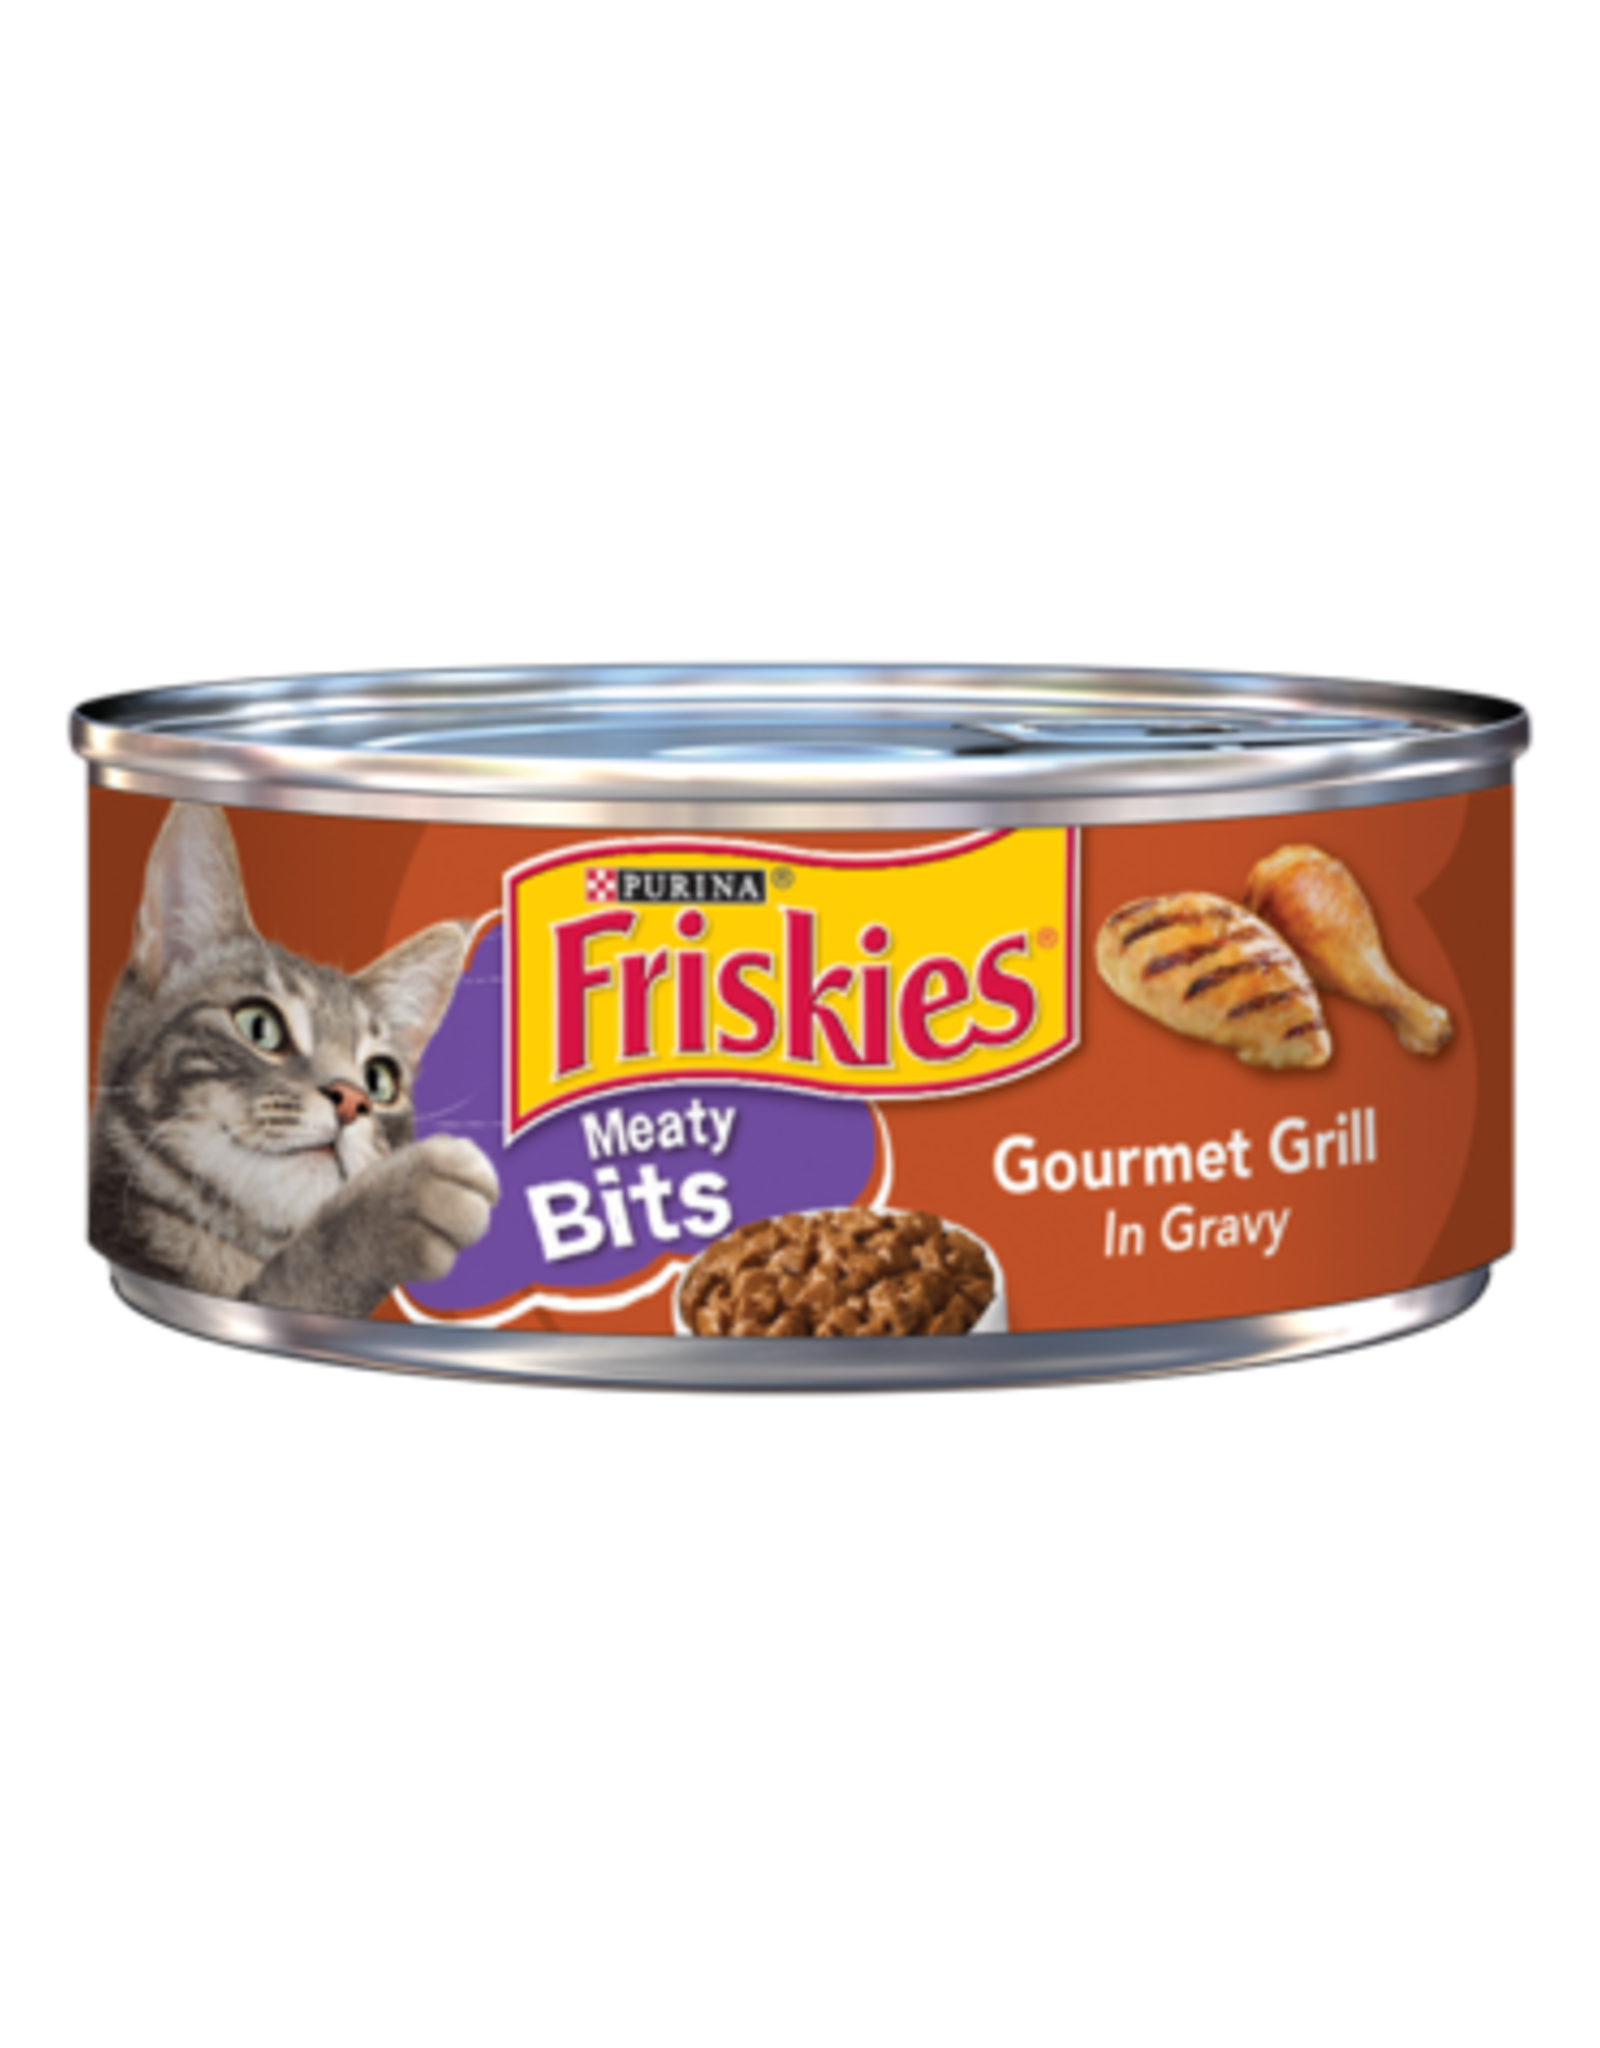 NESTLE PURINA PETCARE FRISKIES CAT GOURMET GRILL MEATY BITS 5.5OZ CASE OF 24